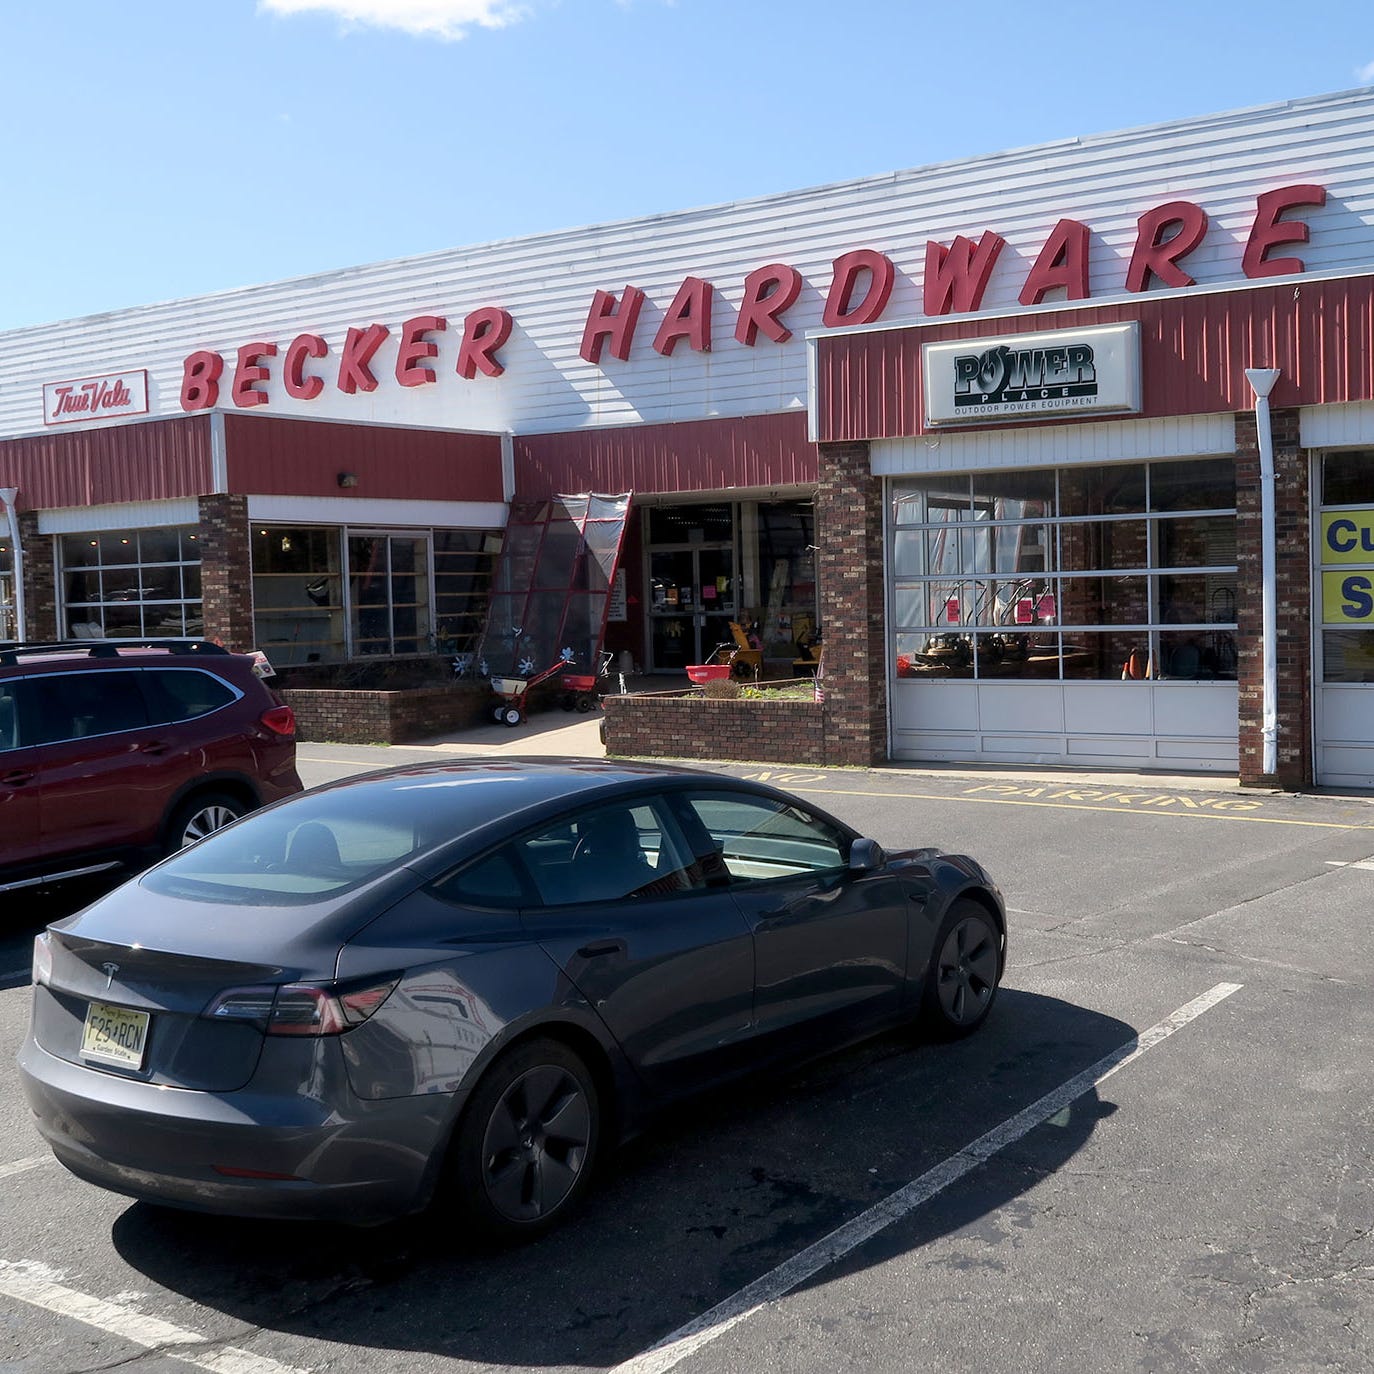 Exterior of Becker Hardware in Colts Neck Thursday, March 9, 2023. The fixture along Route 34 is closing its doors after 120 years in business, including more than 50 years at its current location. 2 ARE R . Sy 